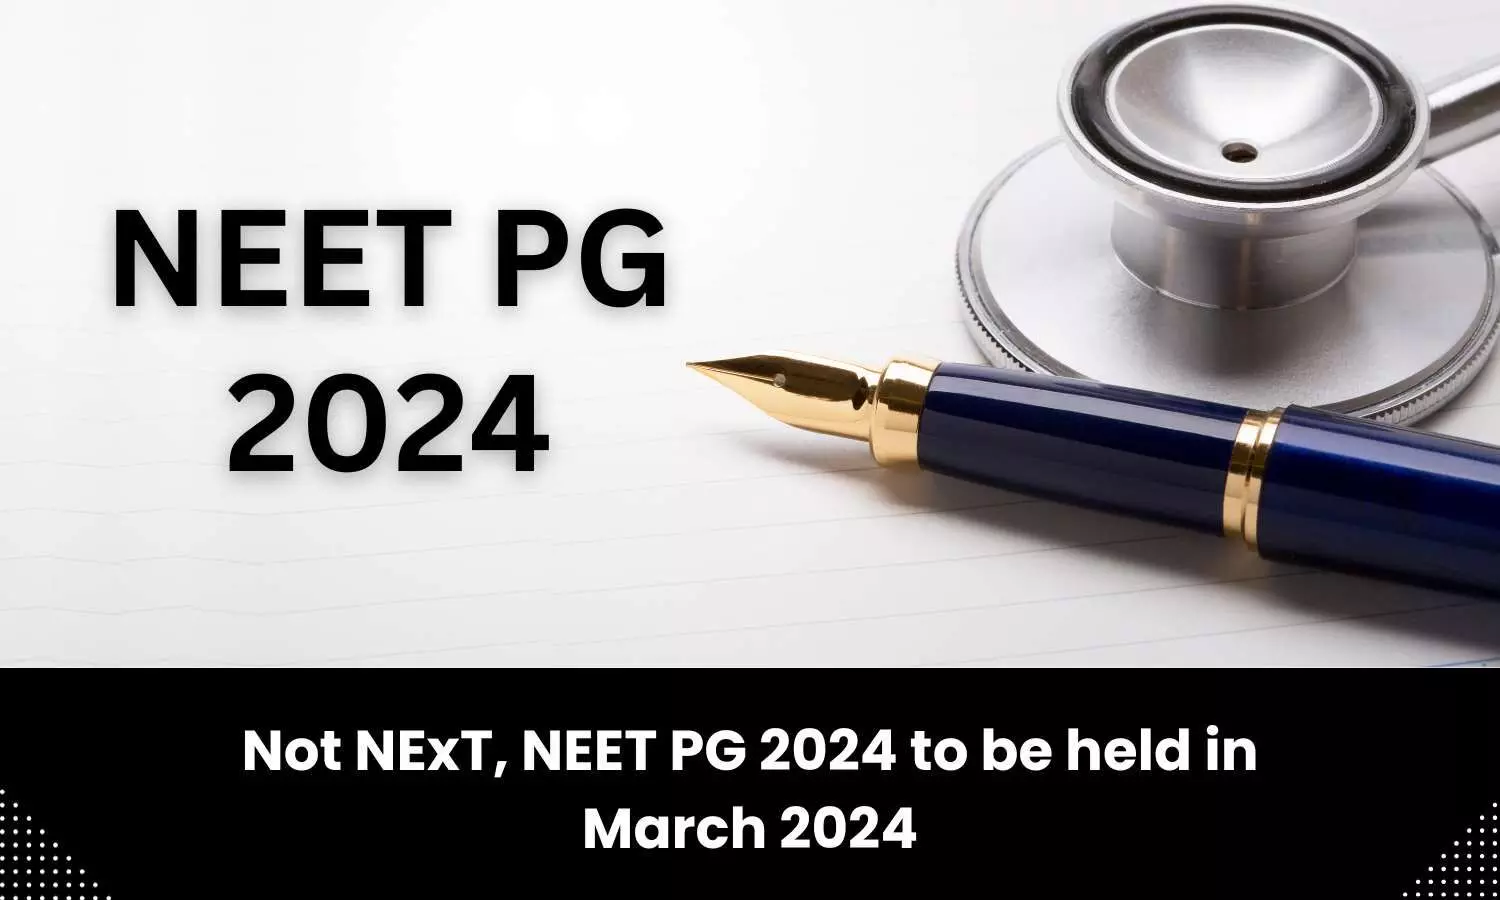 NEET PG 2024 to be held in March 2024